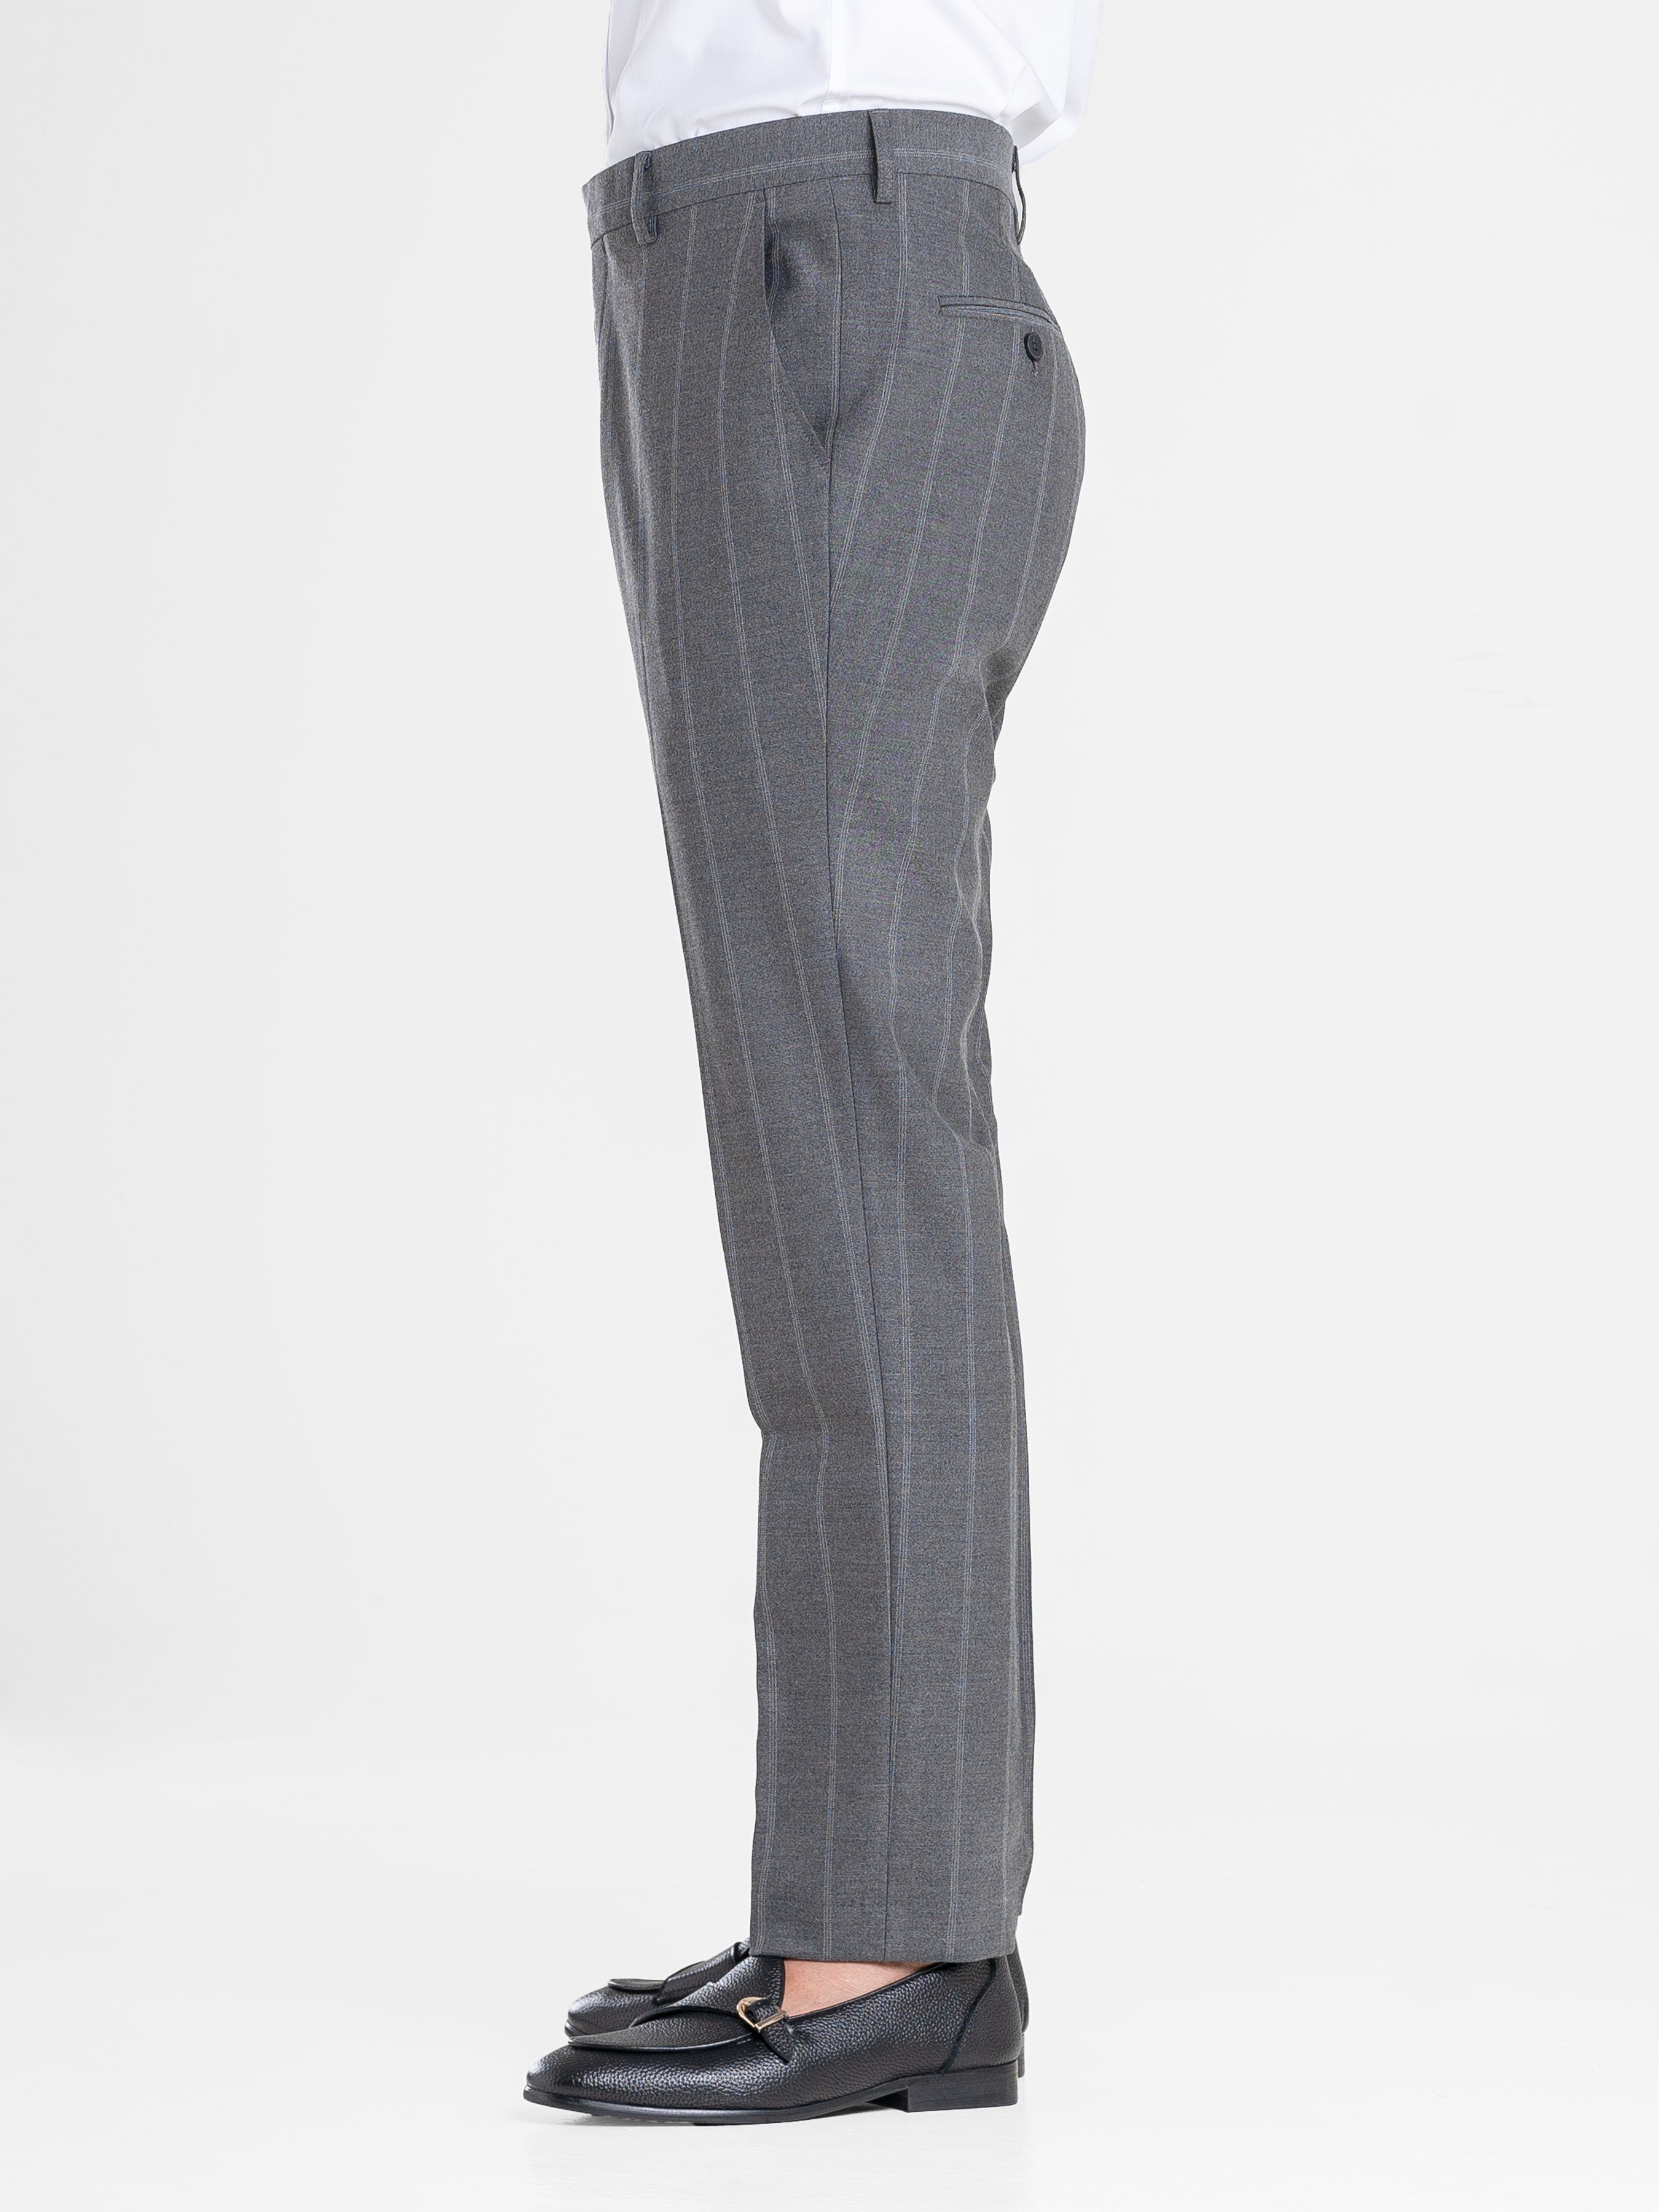 Trousers With Belt Loop -  Dark Grey Wide Stripes (Stretchable)